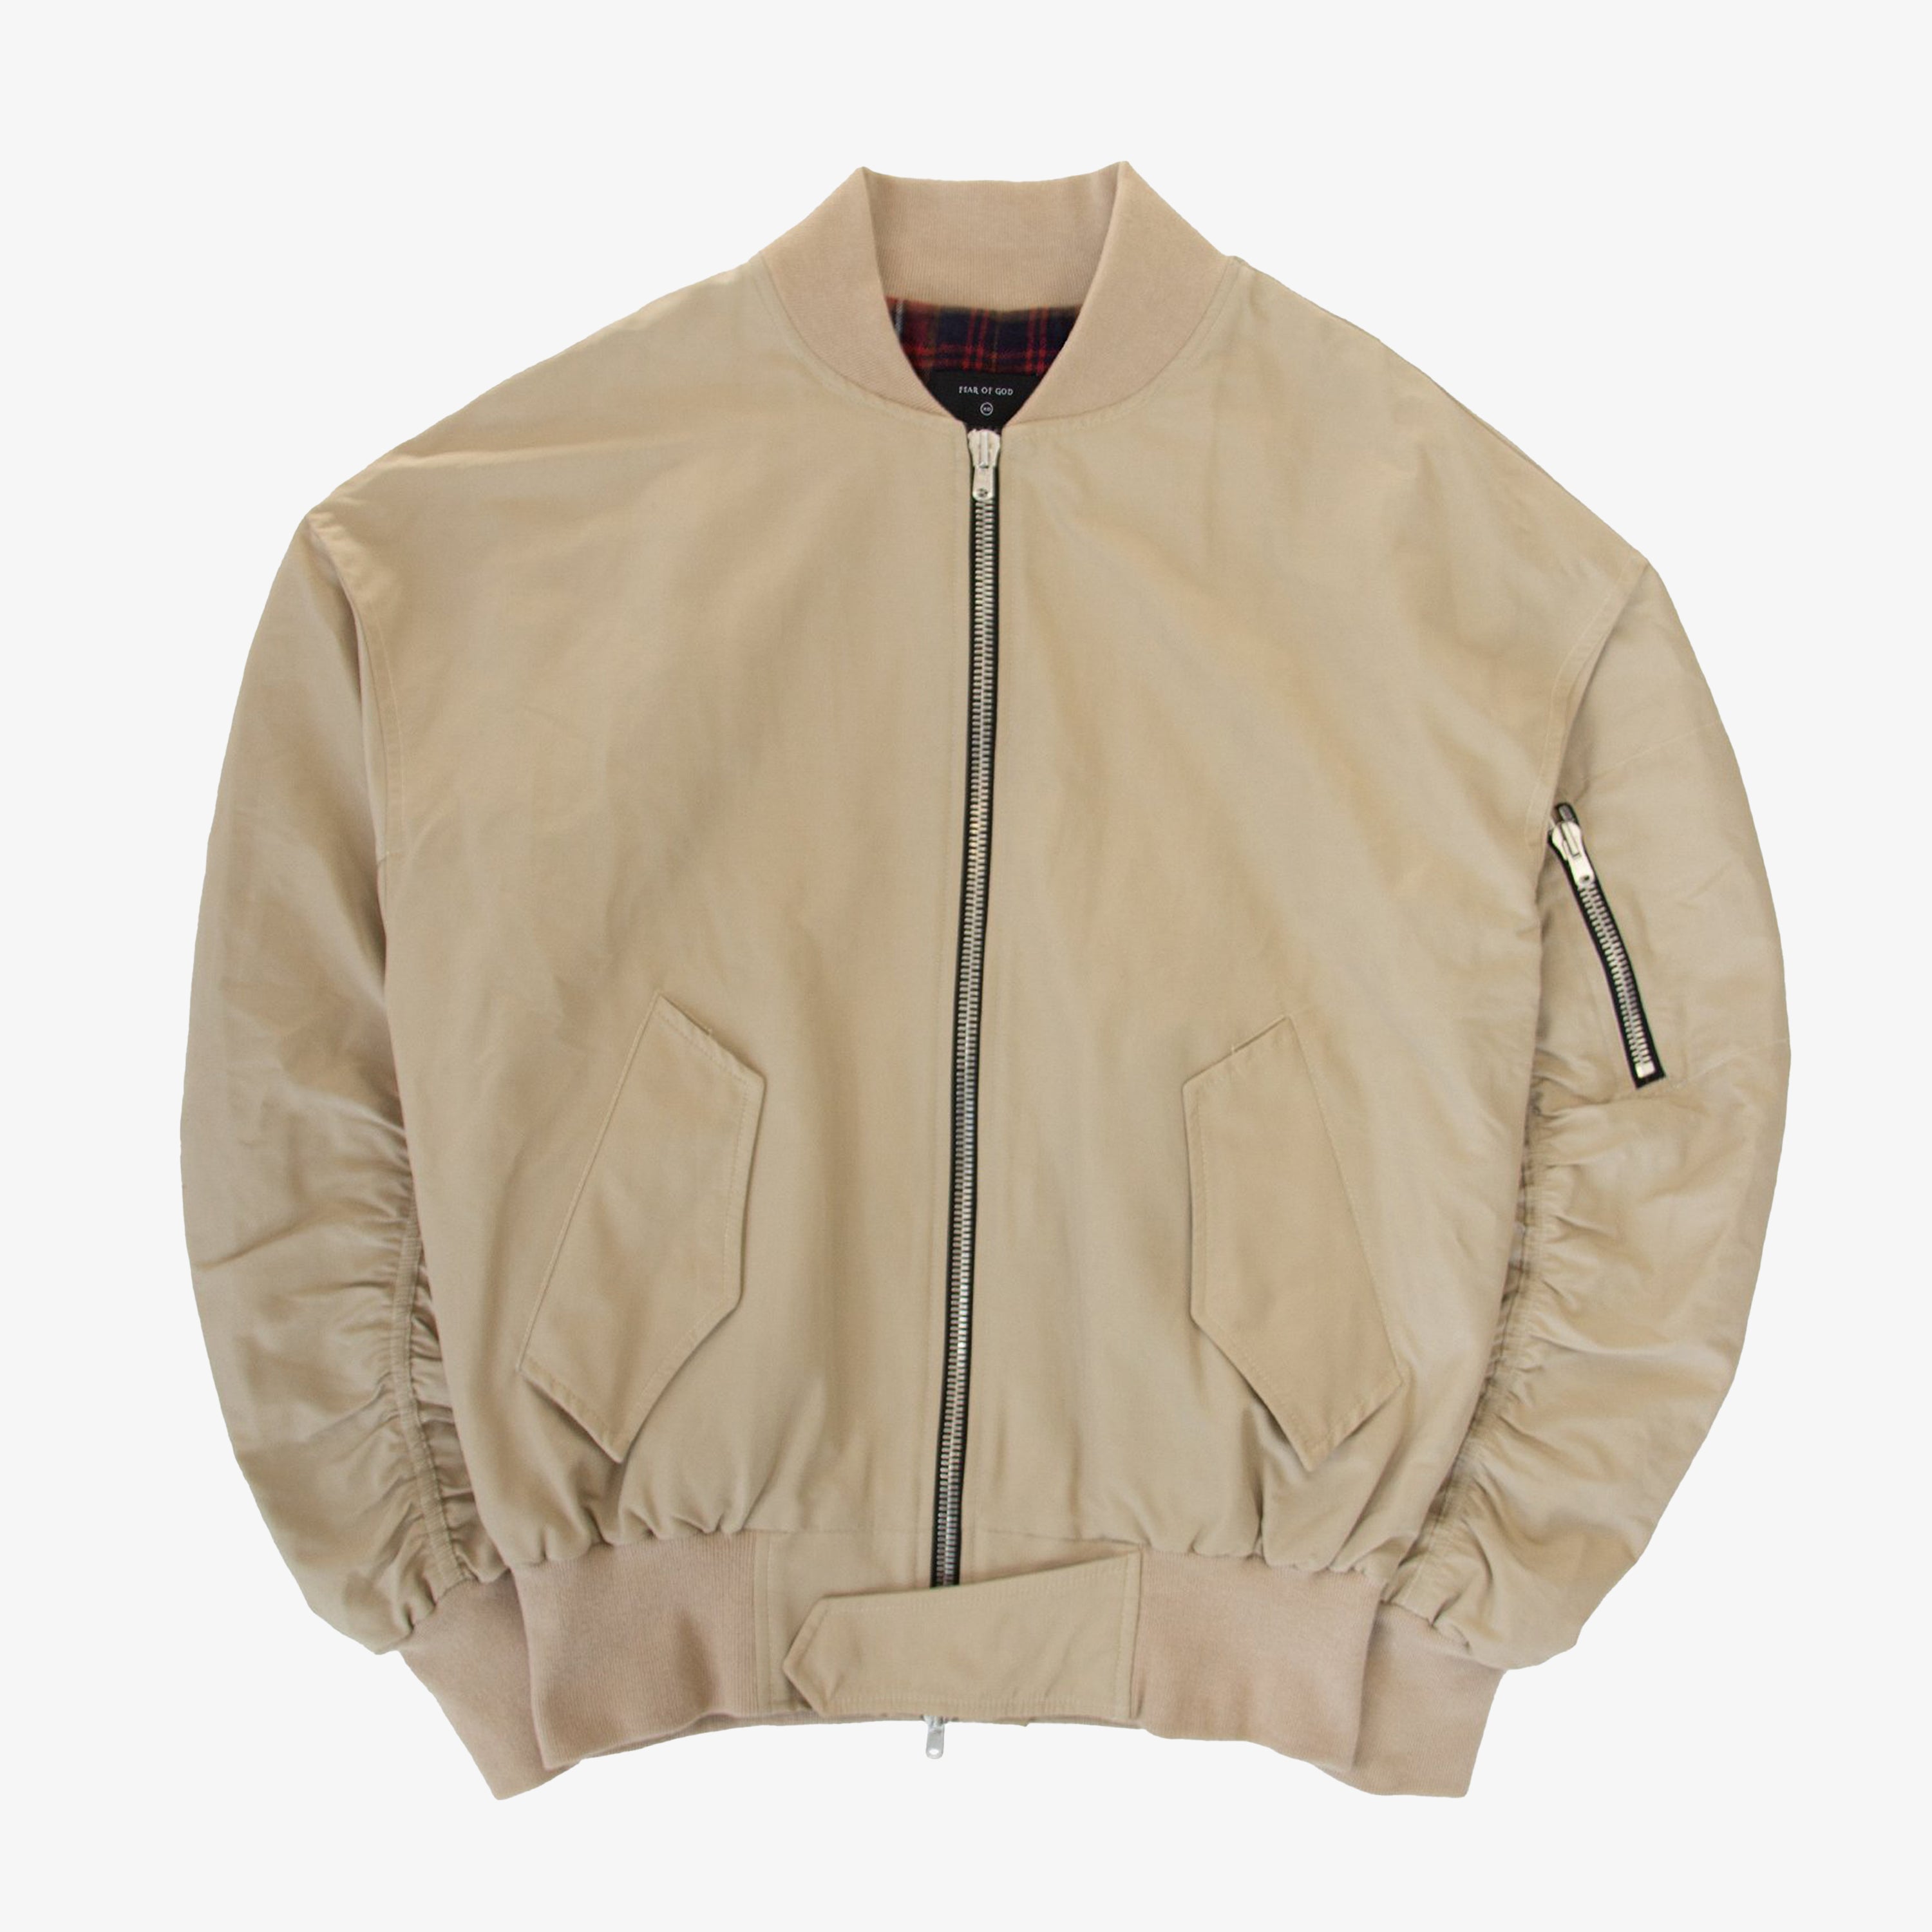 FEAR OF GOD 4TH COLLECTION BOMBER (BARNEY'S EXCLUSIVE) – OBTAIND